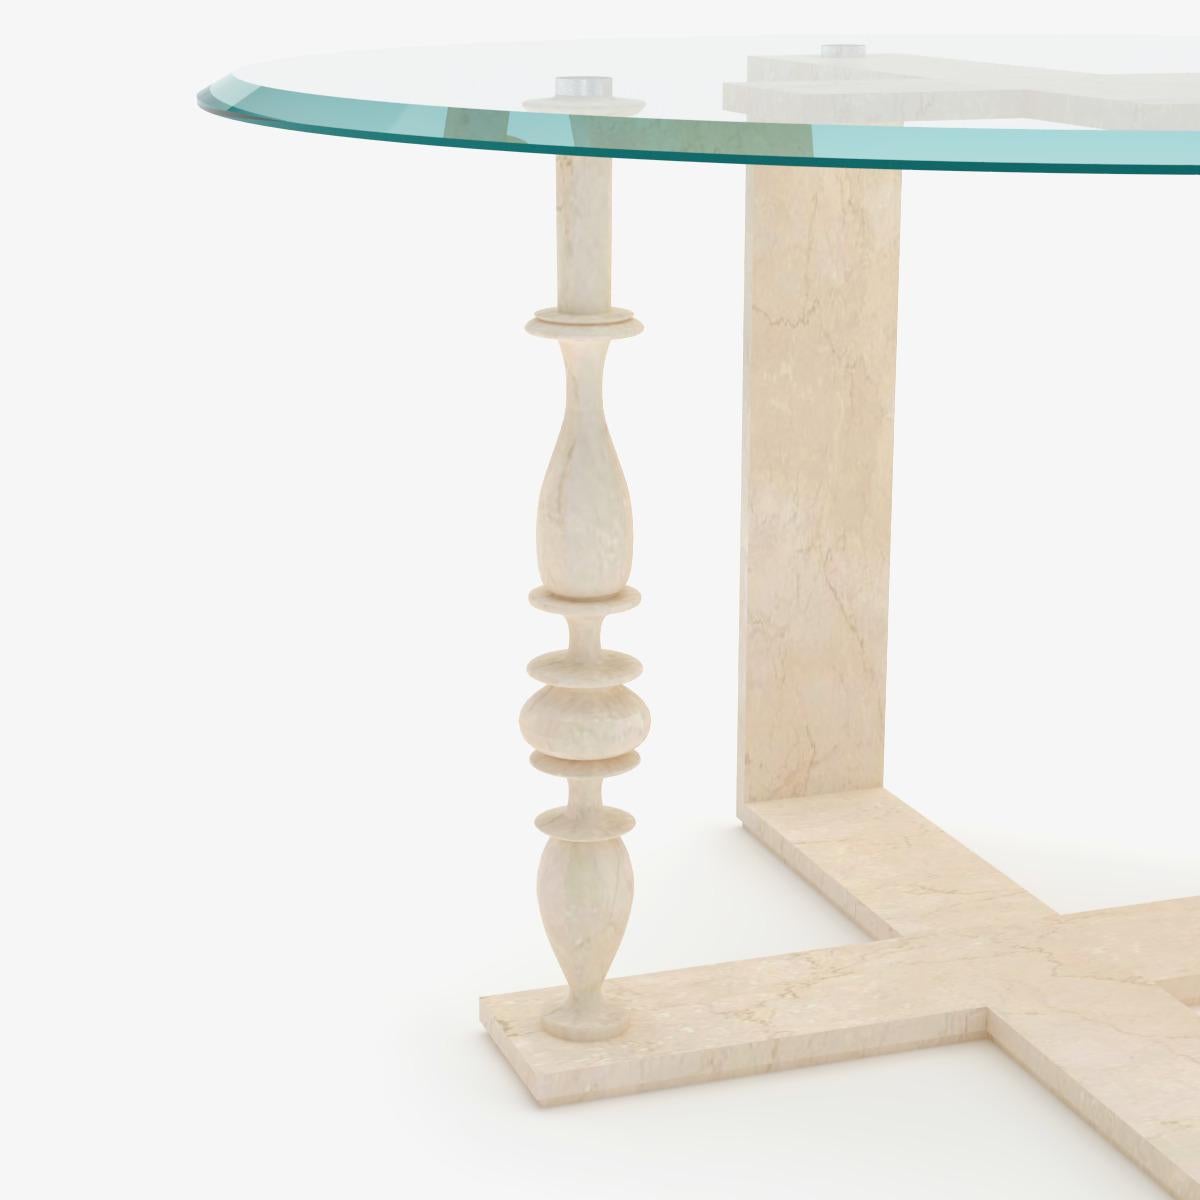 The main feature of the Columns Frame table is given by the table legs, made entirely of Bianco Veselye marble, which take the shape of a column and therefore outline a classic style. 

The two opposite legs, which are simple and linear, create a